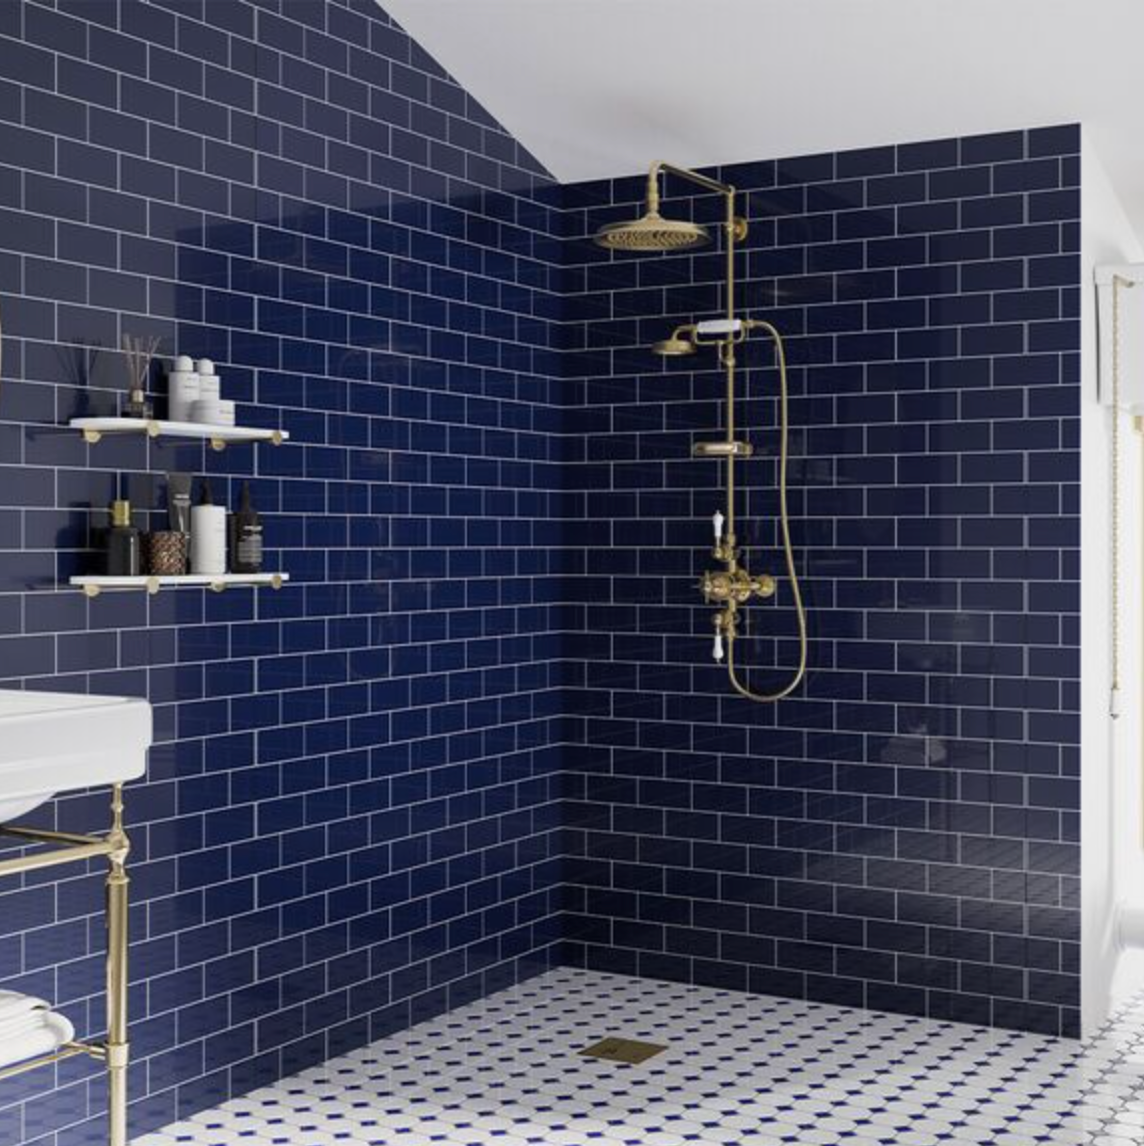 Showerwall Acrylic Patterns & Tiles Collection - Subway Navy